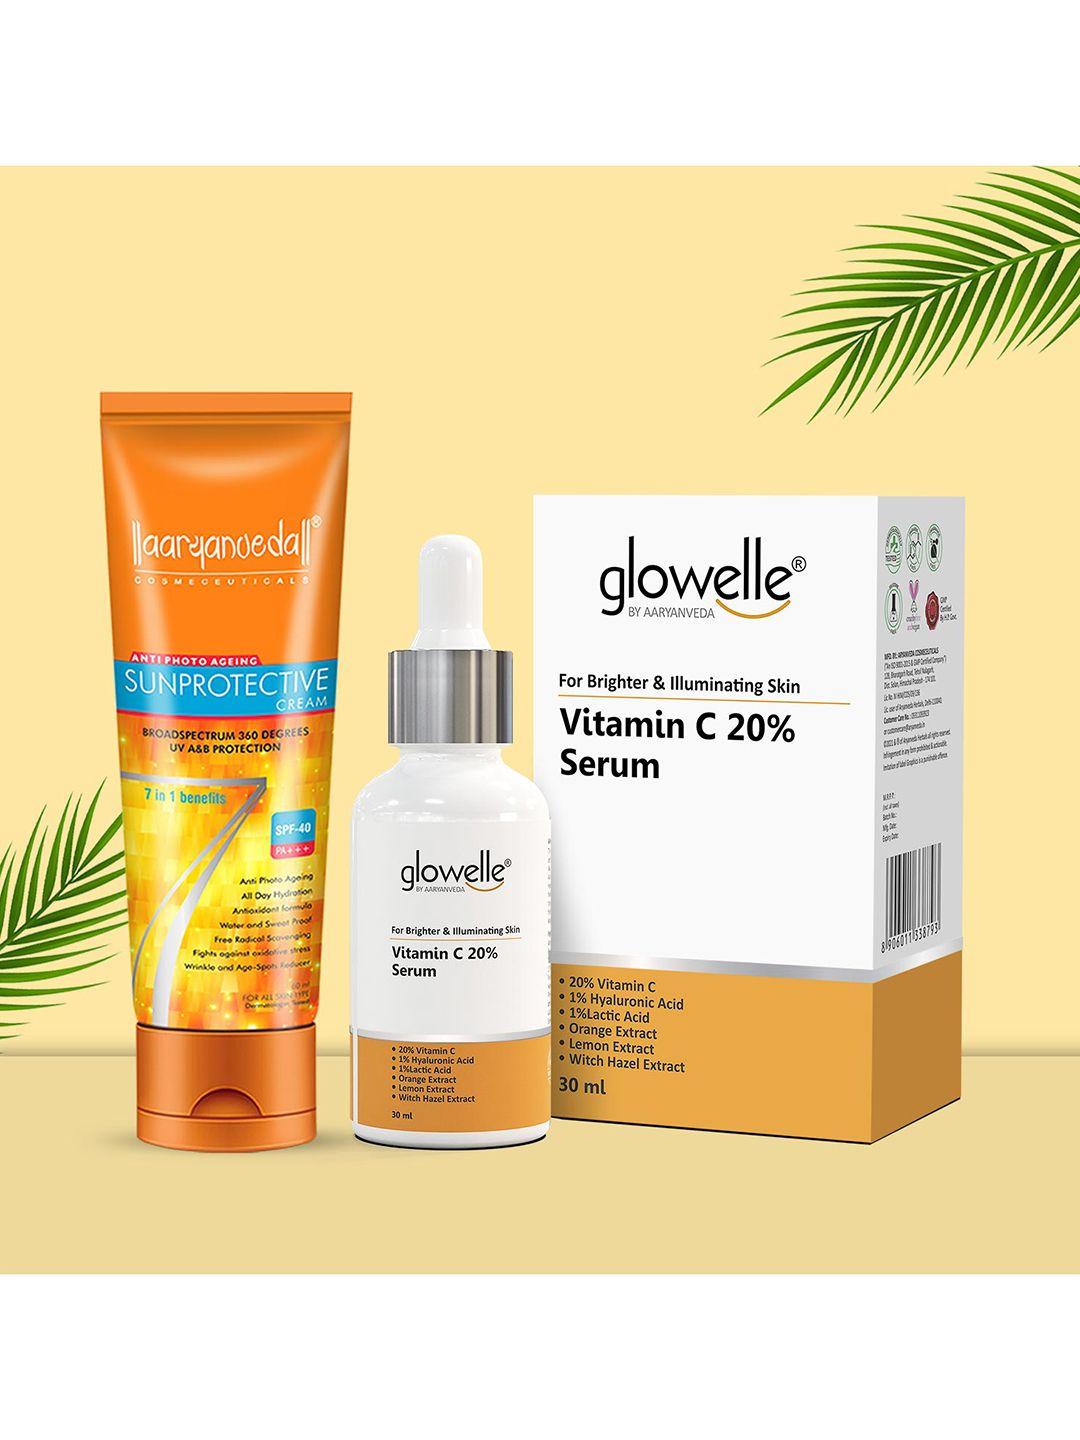 aryanveda-sunscreen-spf-40-pa+++-with-glowelle-vitamin-c-face-serum-for-illuminated-skin-90g-each